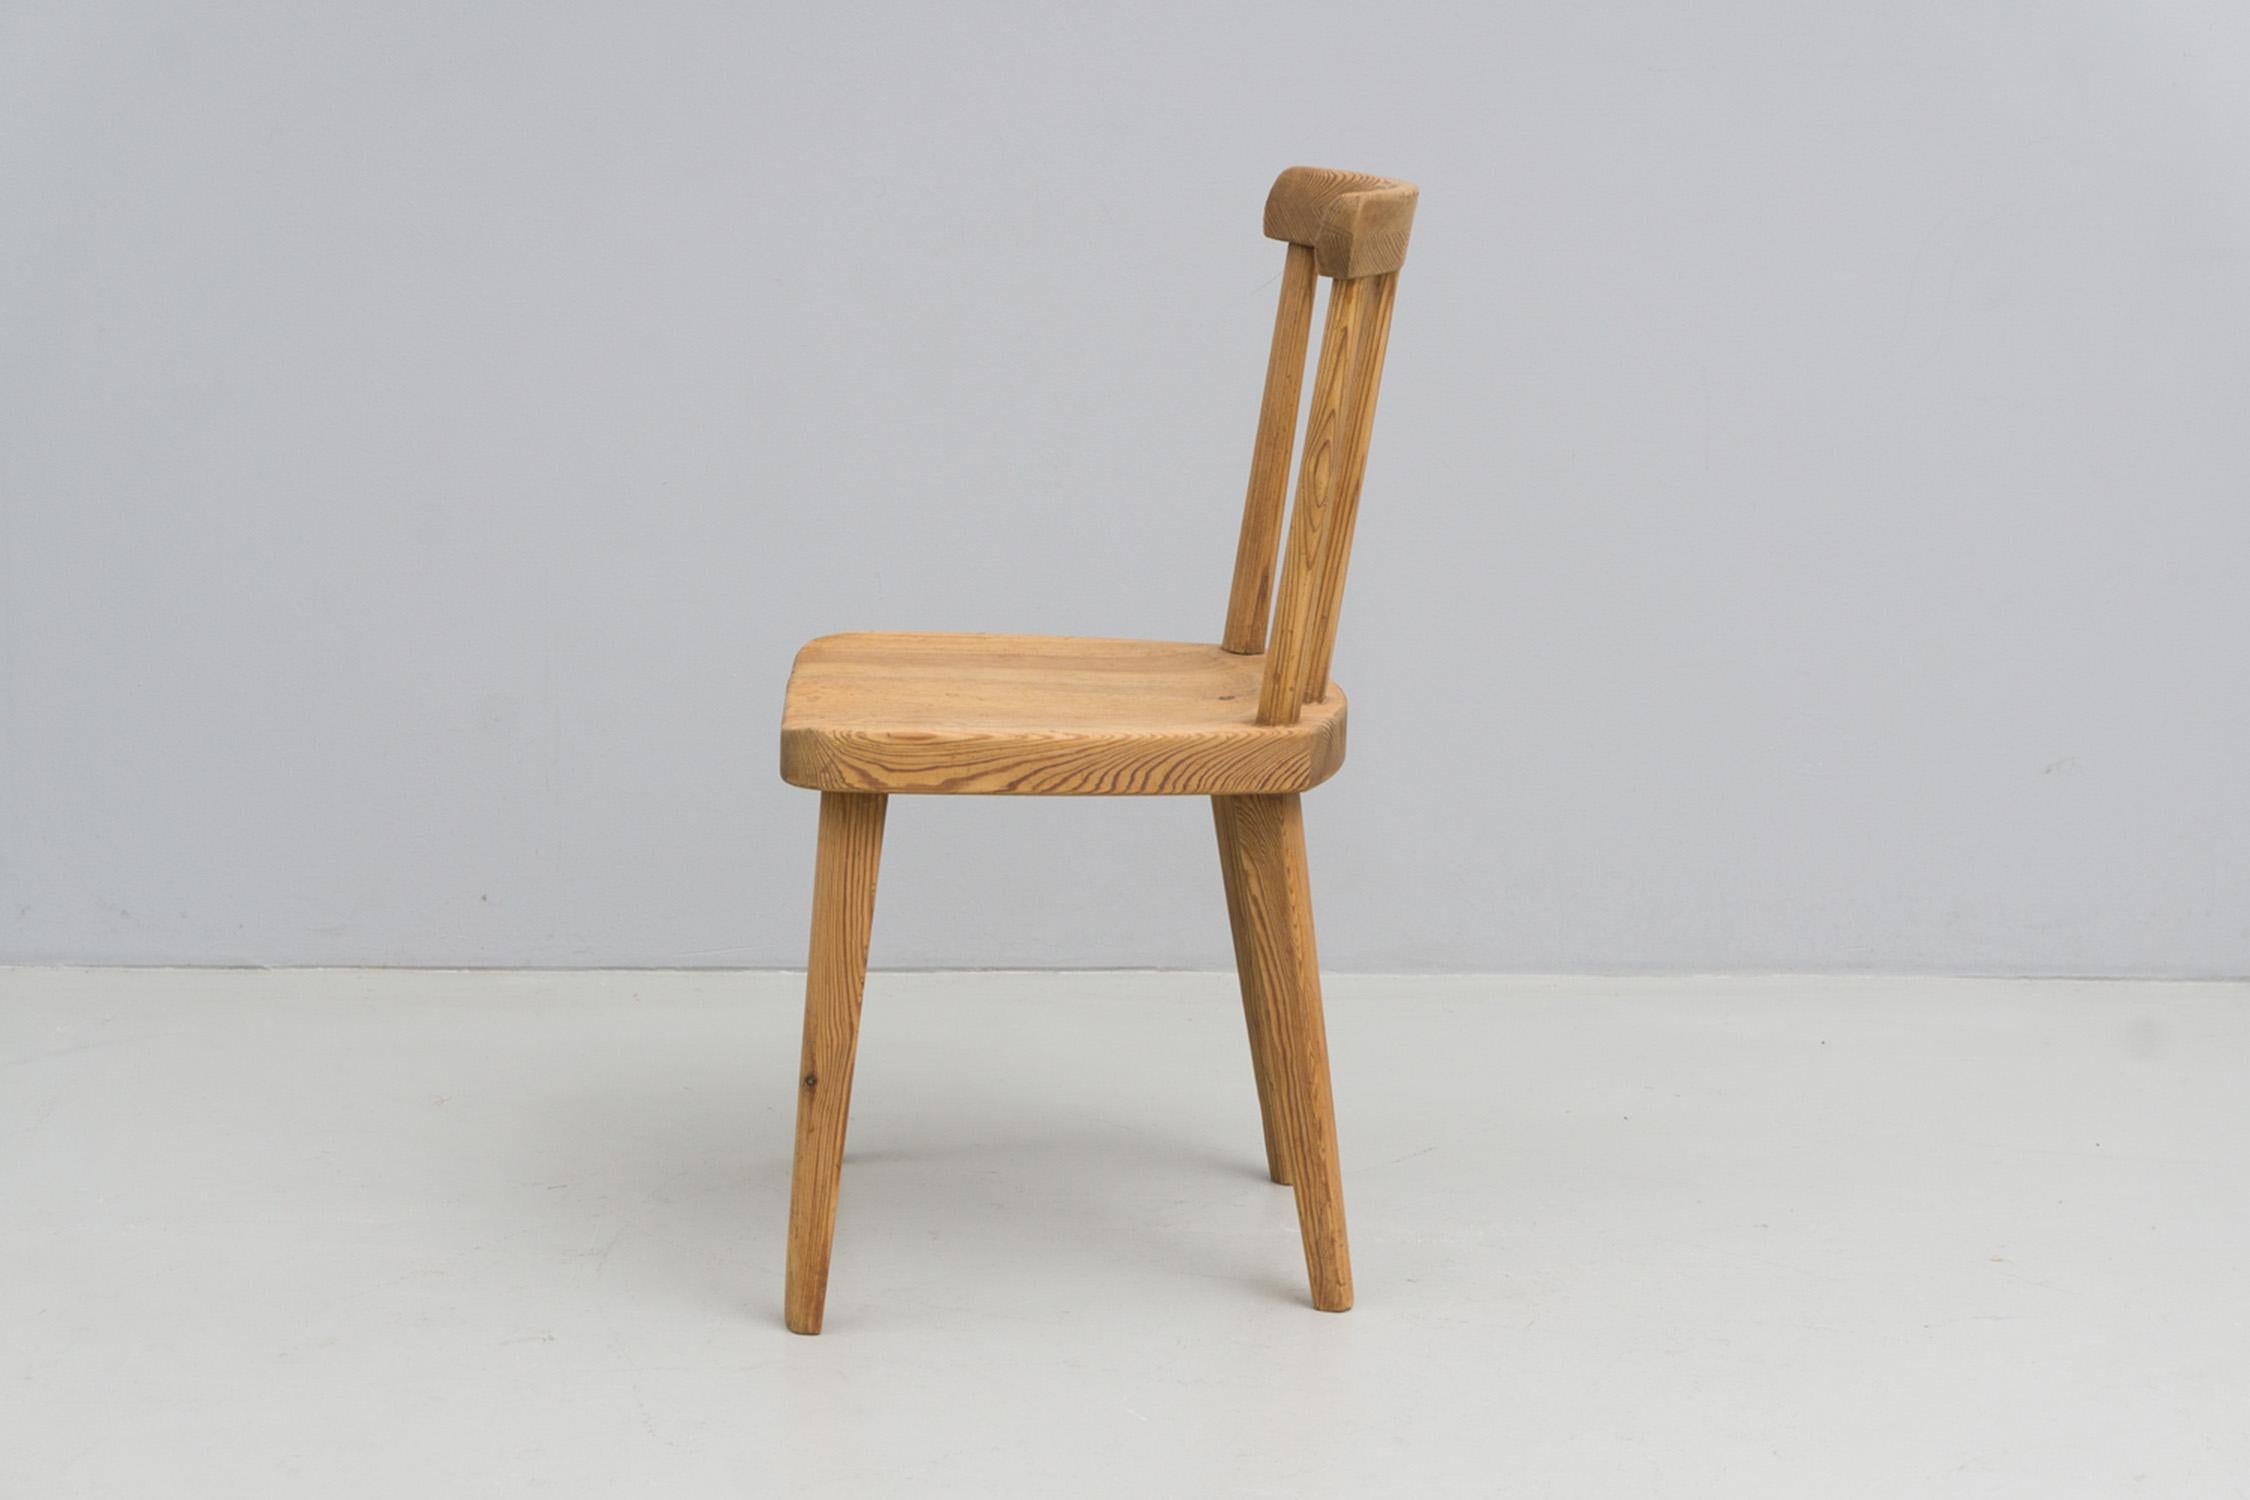 Set of Swedish Pine Wood Chairs, 'Uto' by Axel Einar Hjorth, 1930 For Sale 1